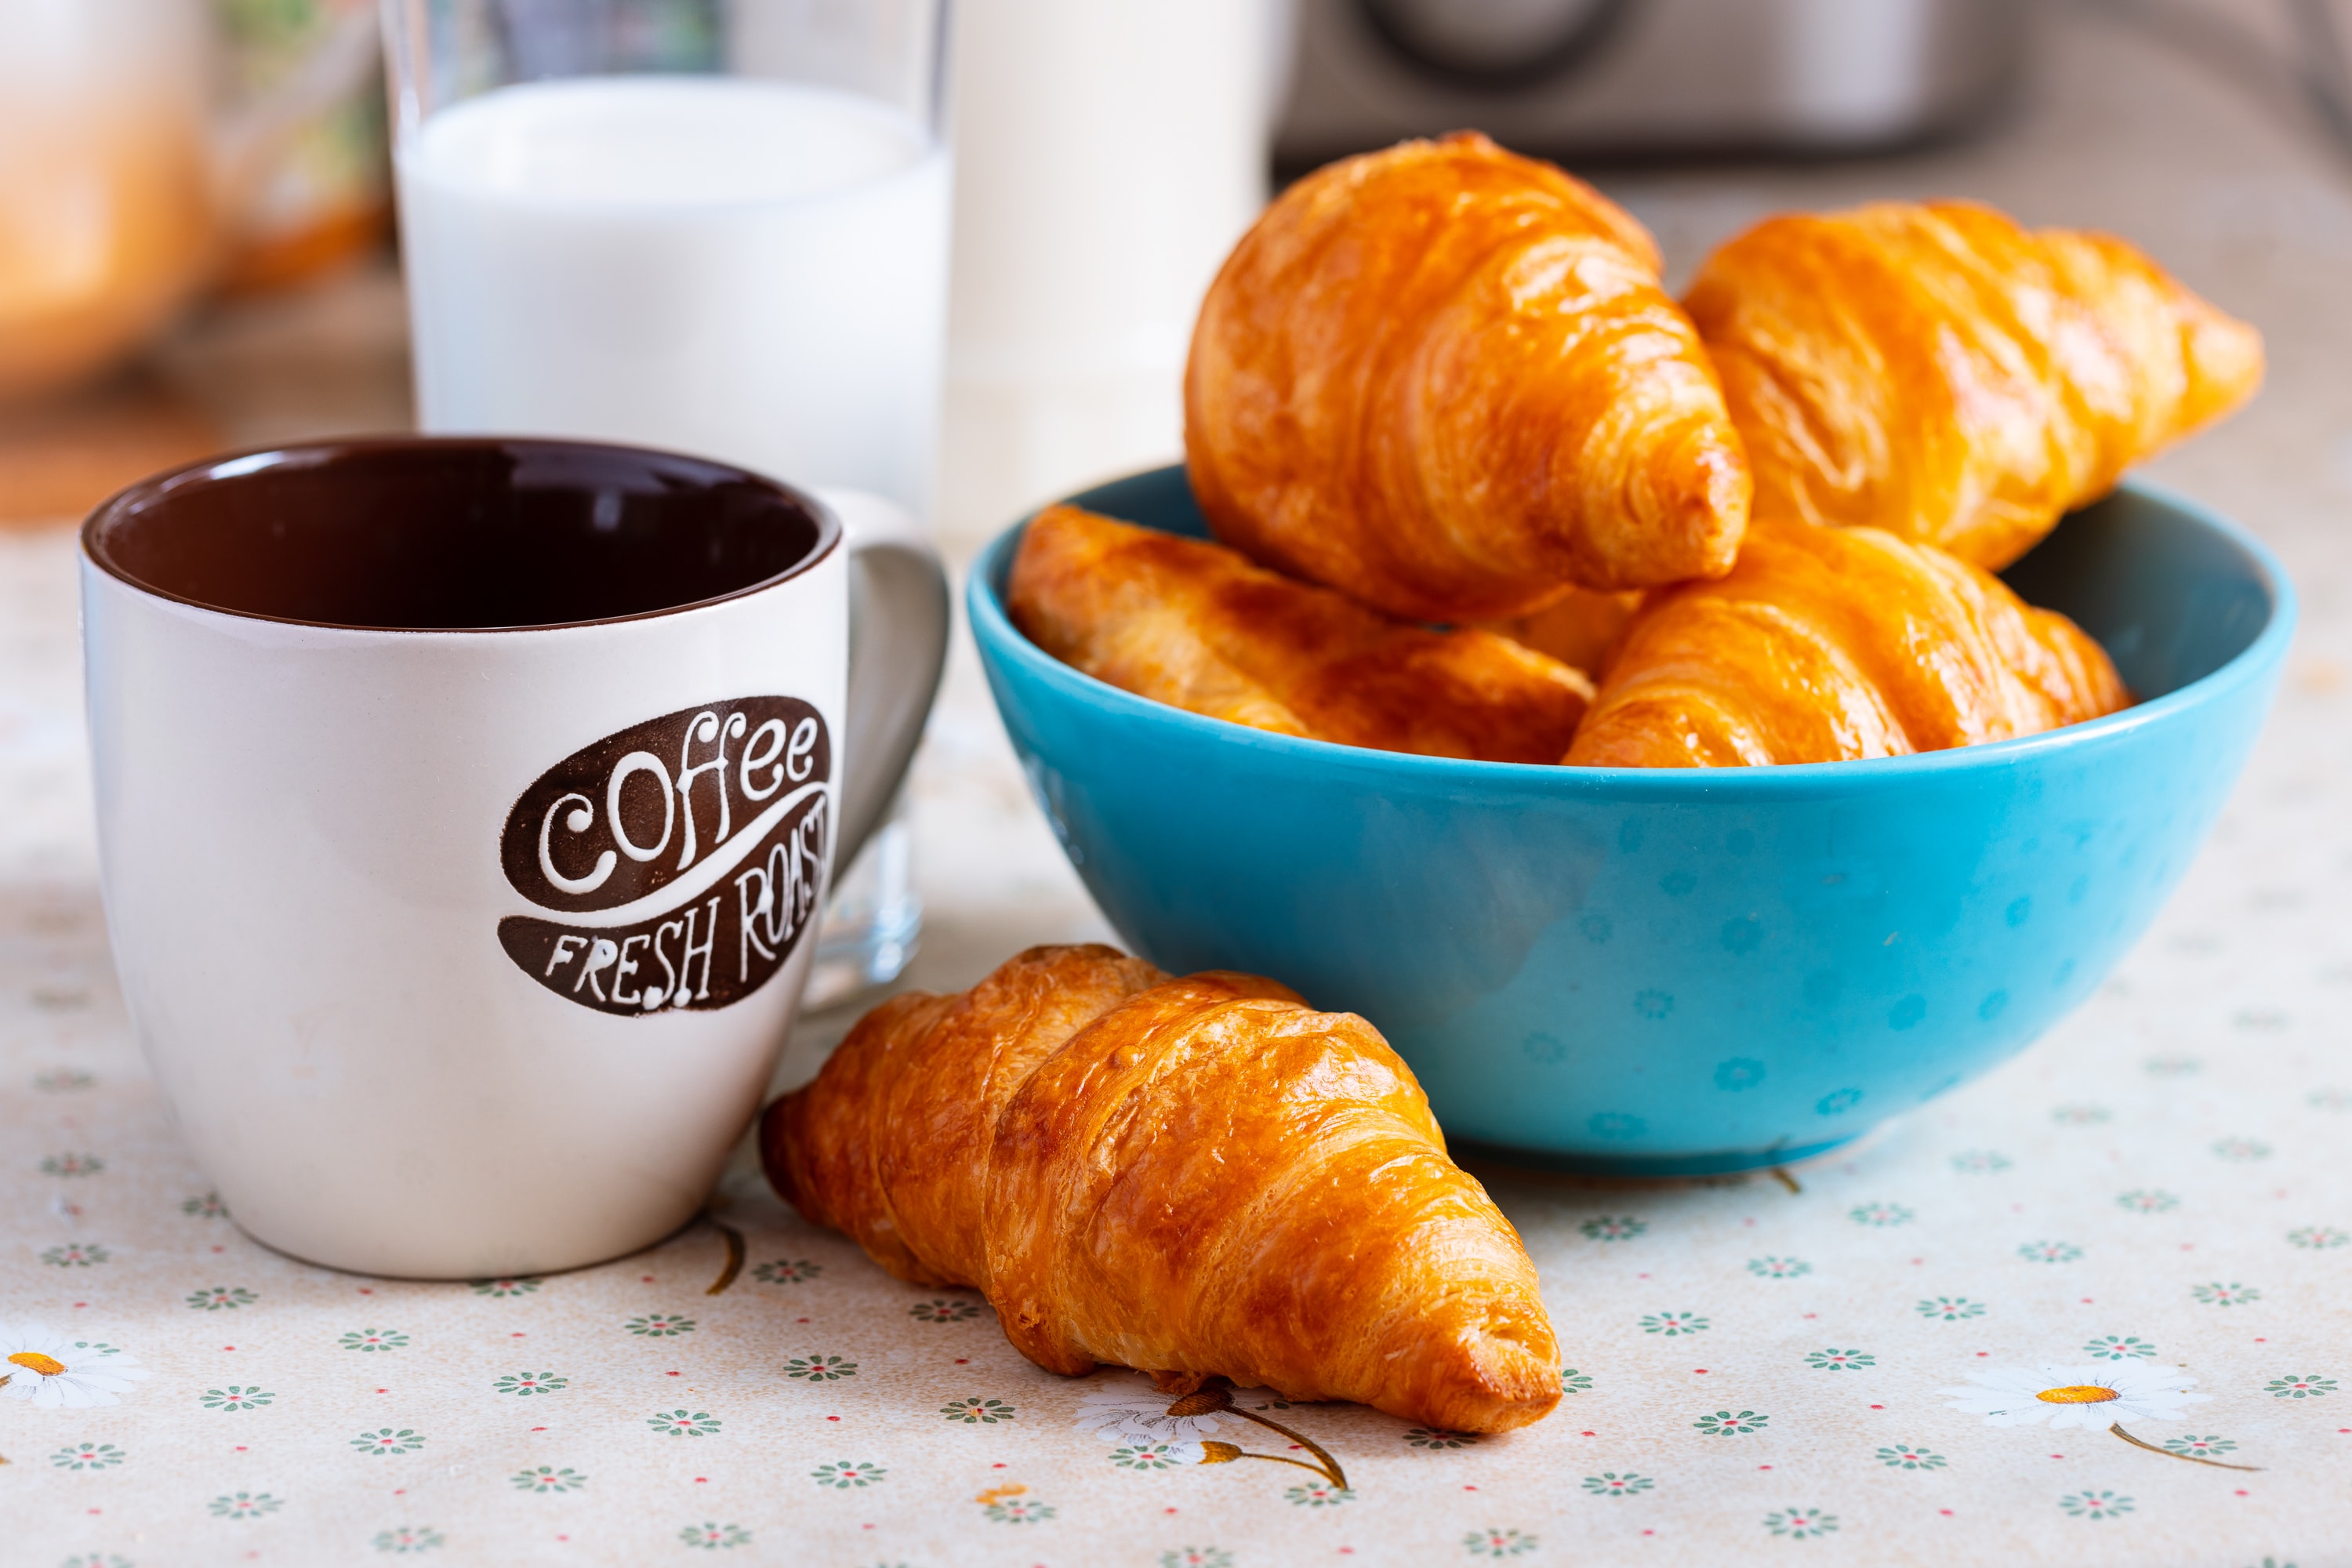 A bowl of croissants with a mug of coffee